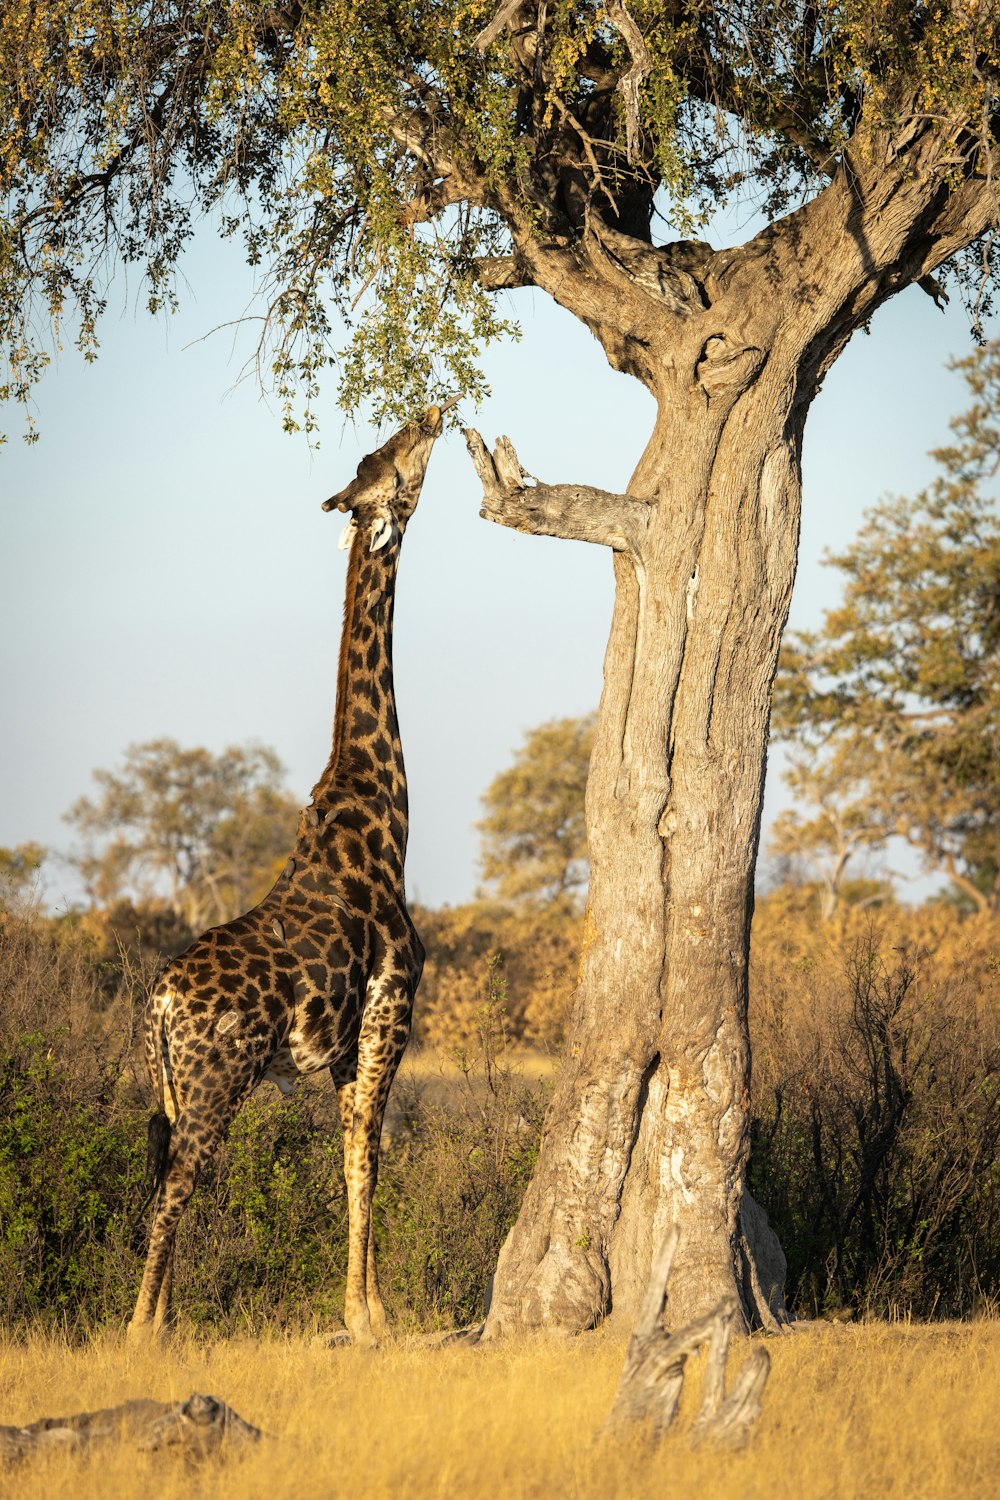 a giraffe eating from a tree